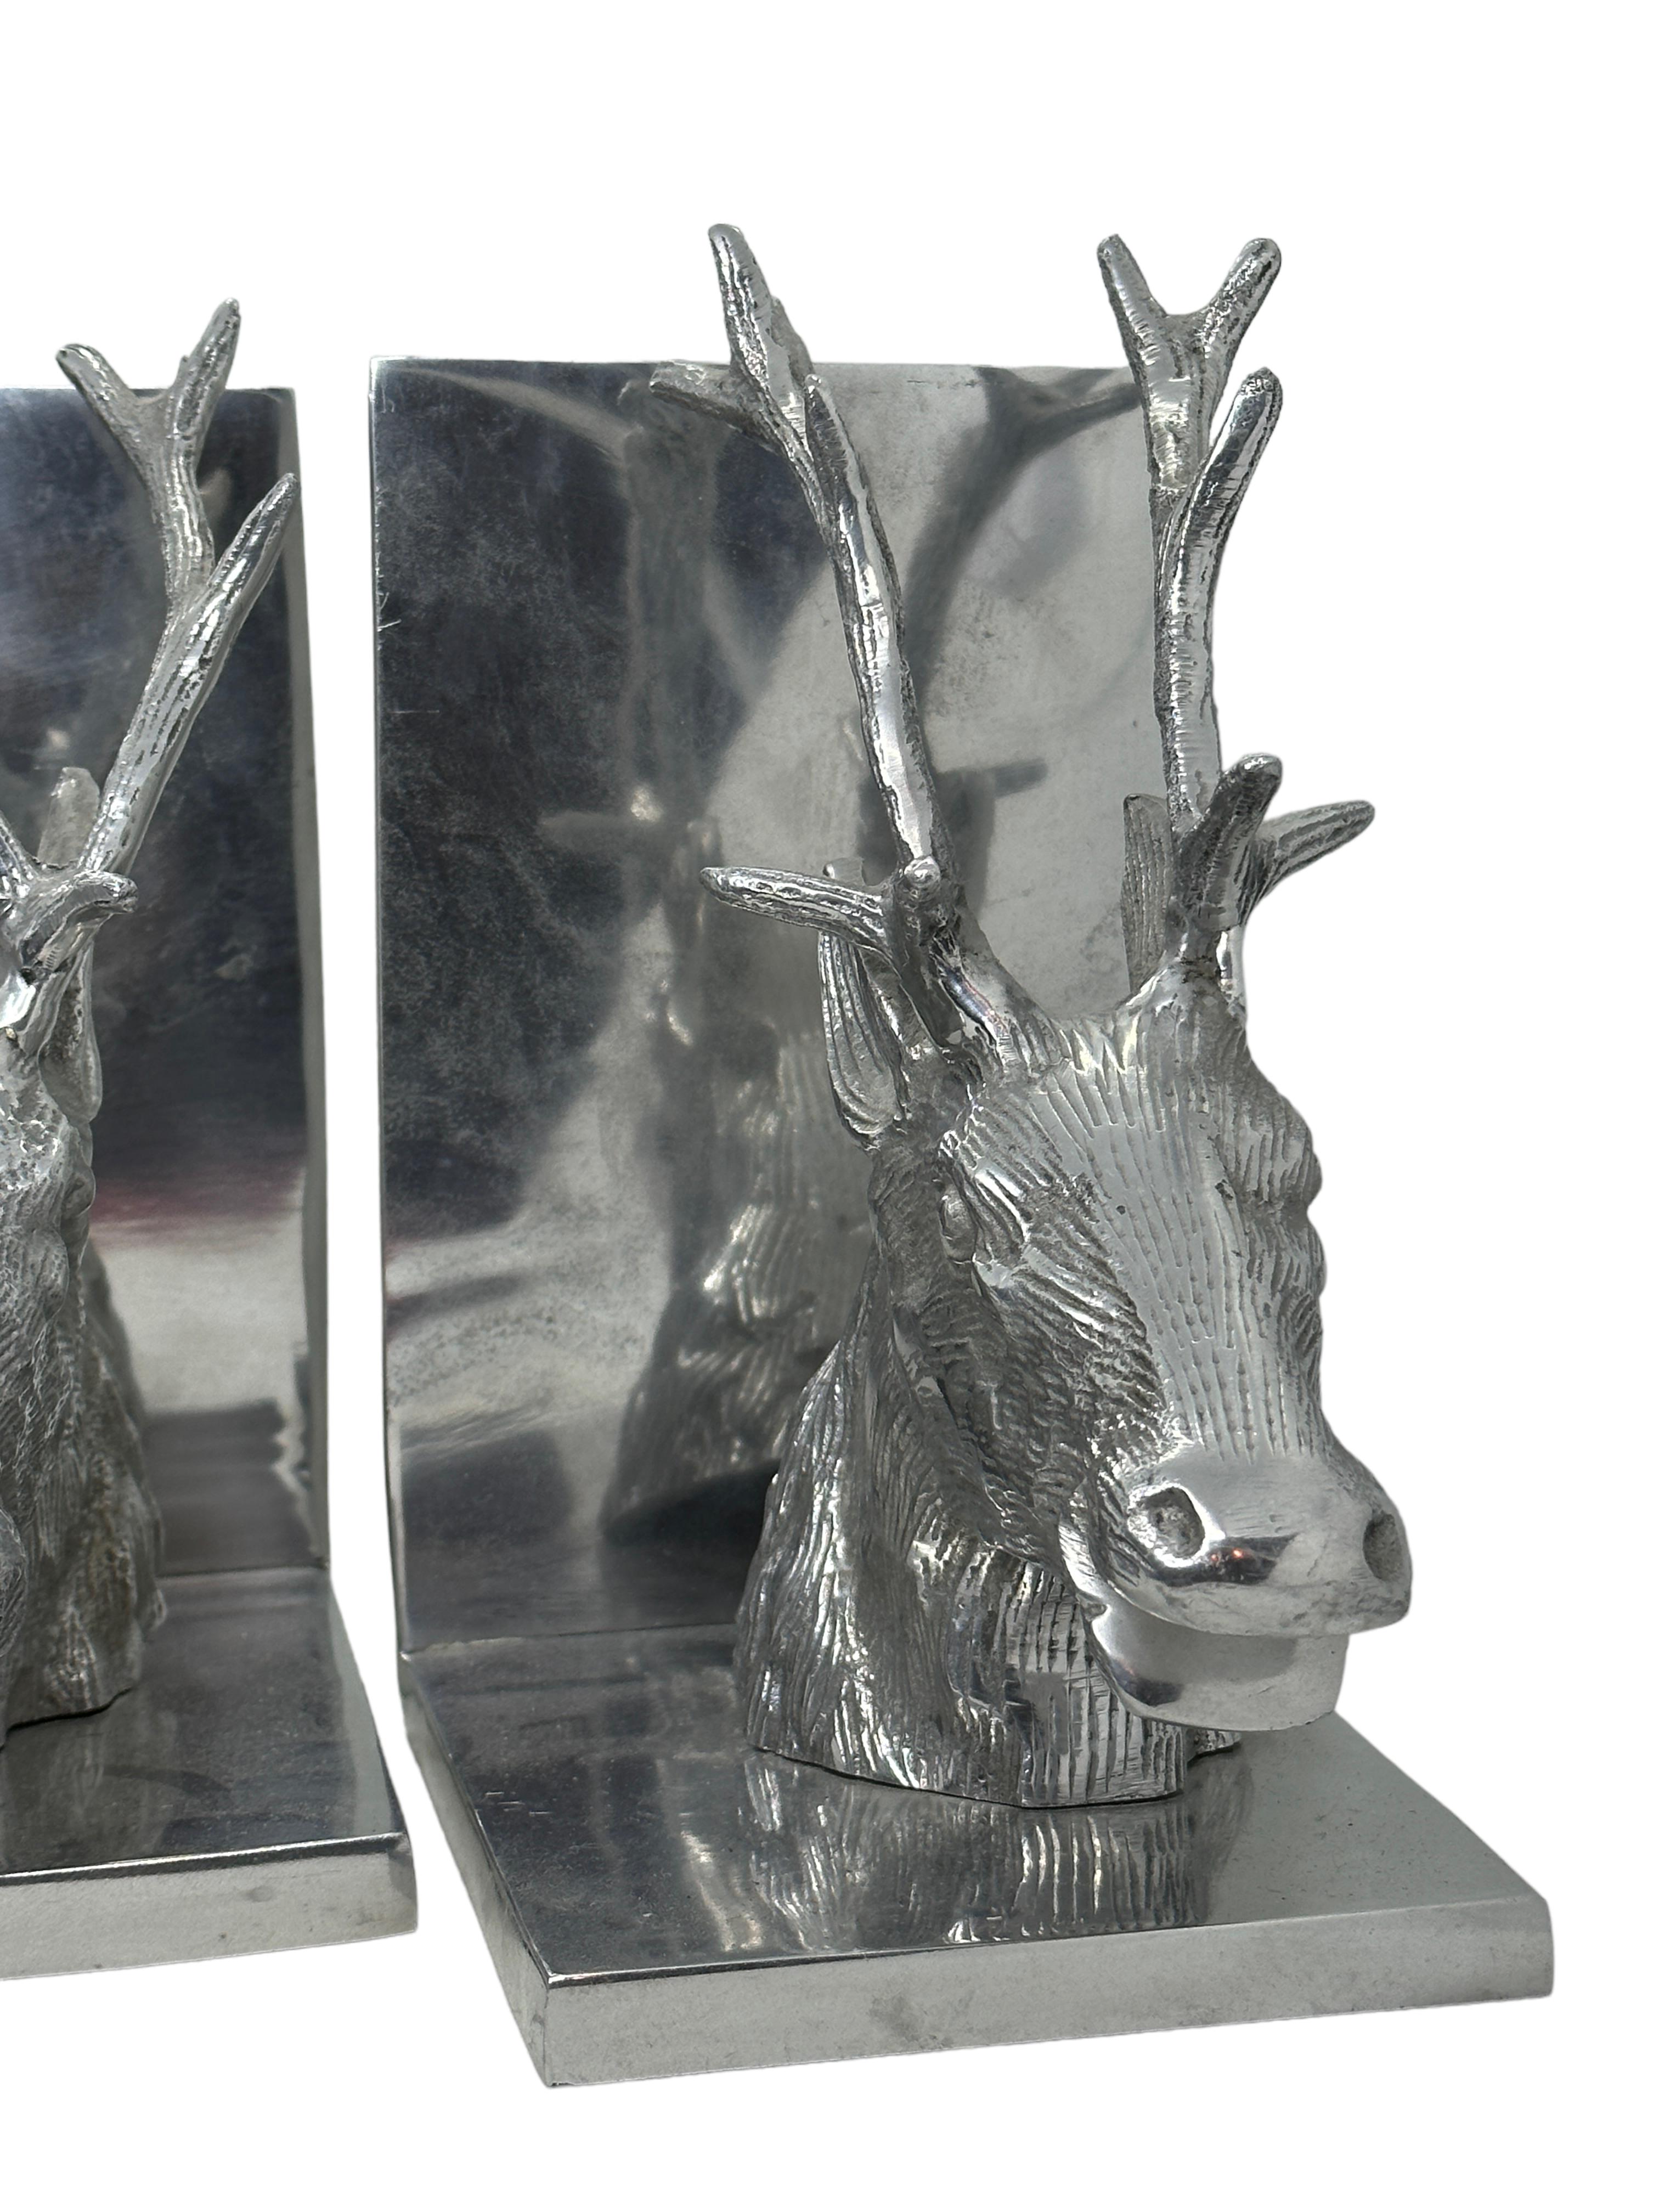 Pair of Vintage Polished Aluminum Deer Bookends, circa 1980s In Good Condition For Sale In Nuernberg, DE